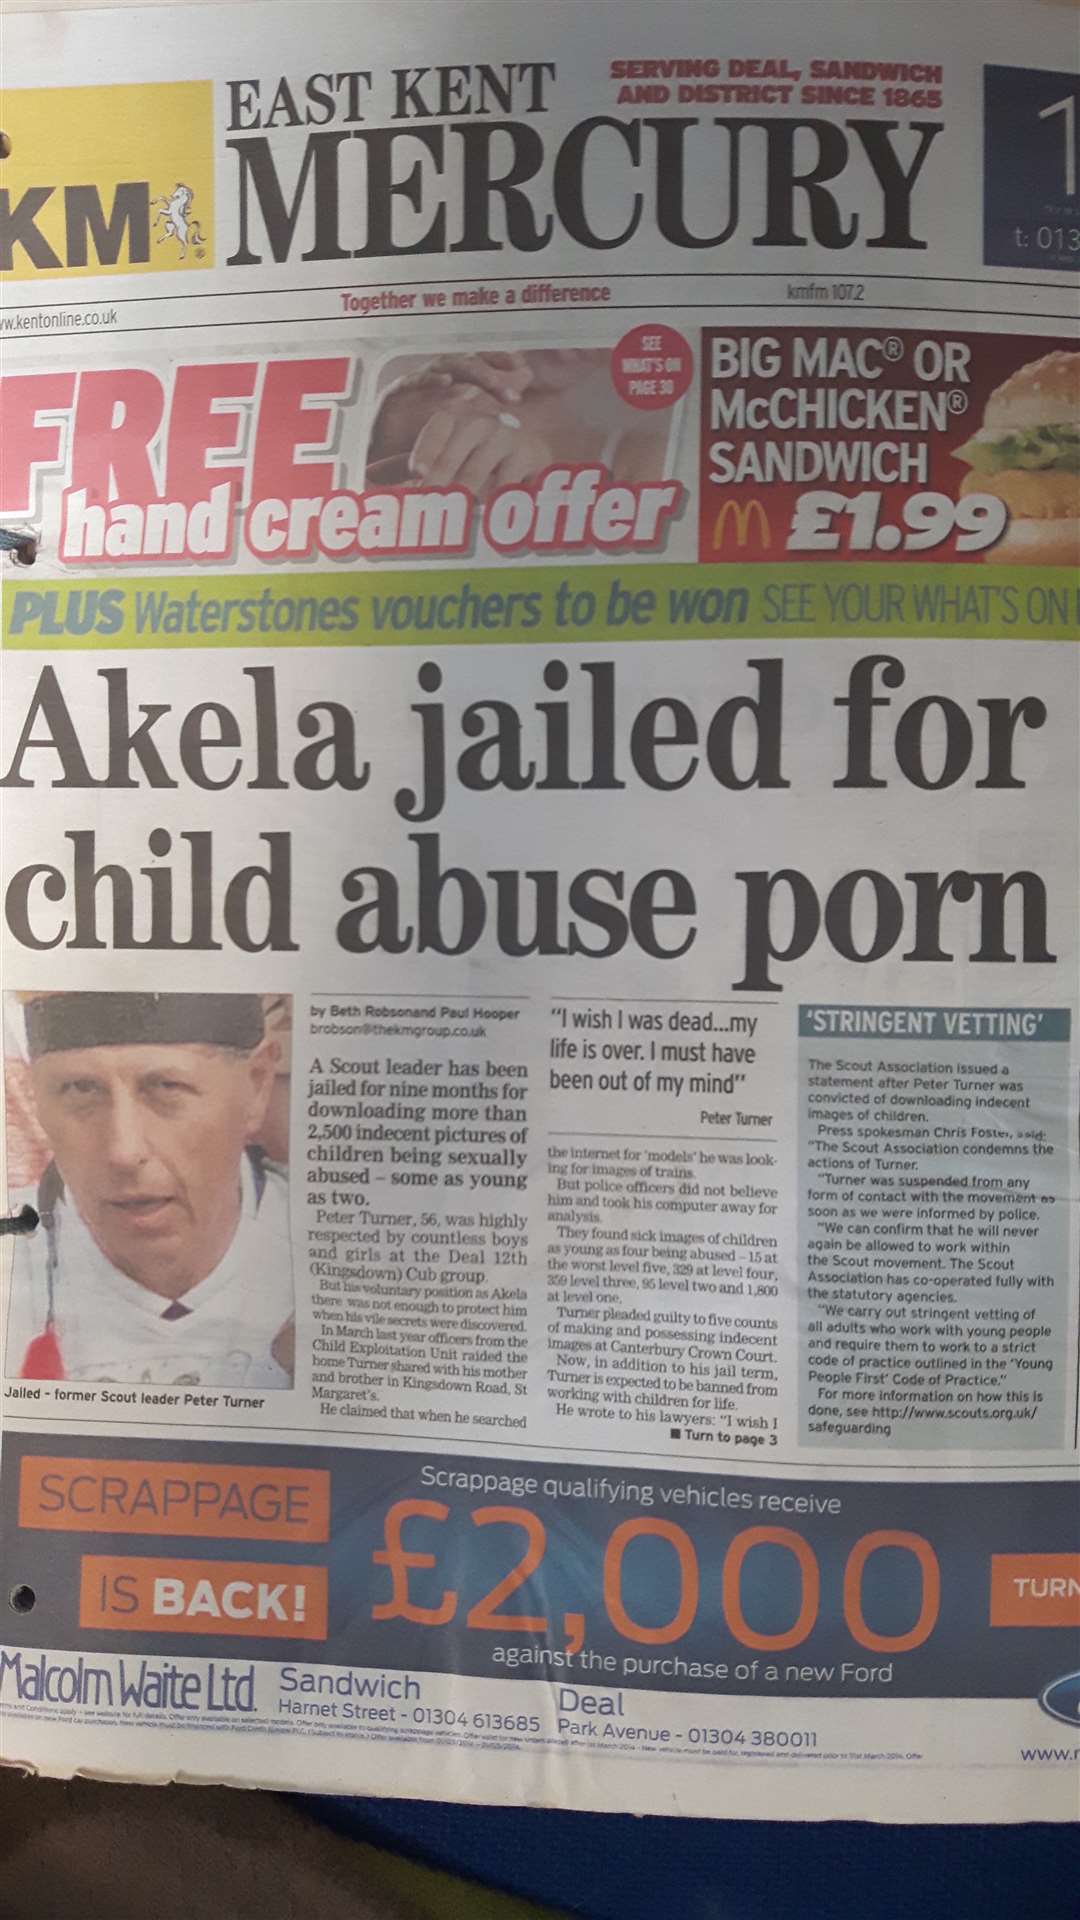 The front page of the East Kent Mercury which exposed cubs leader Peter Turner as a pervert - it led to more victims coming forward, bringing him to justice